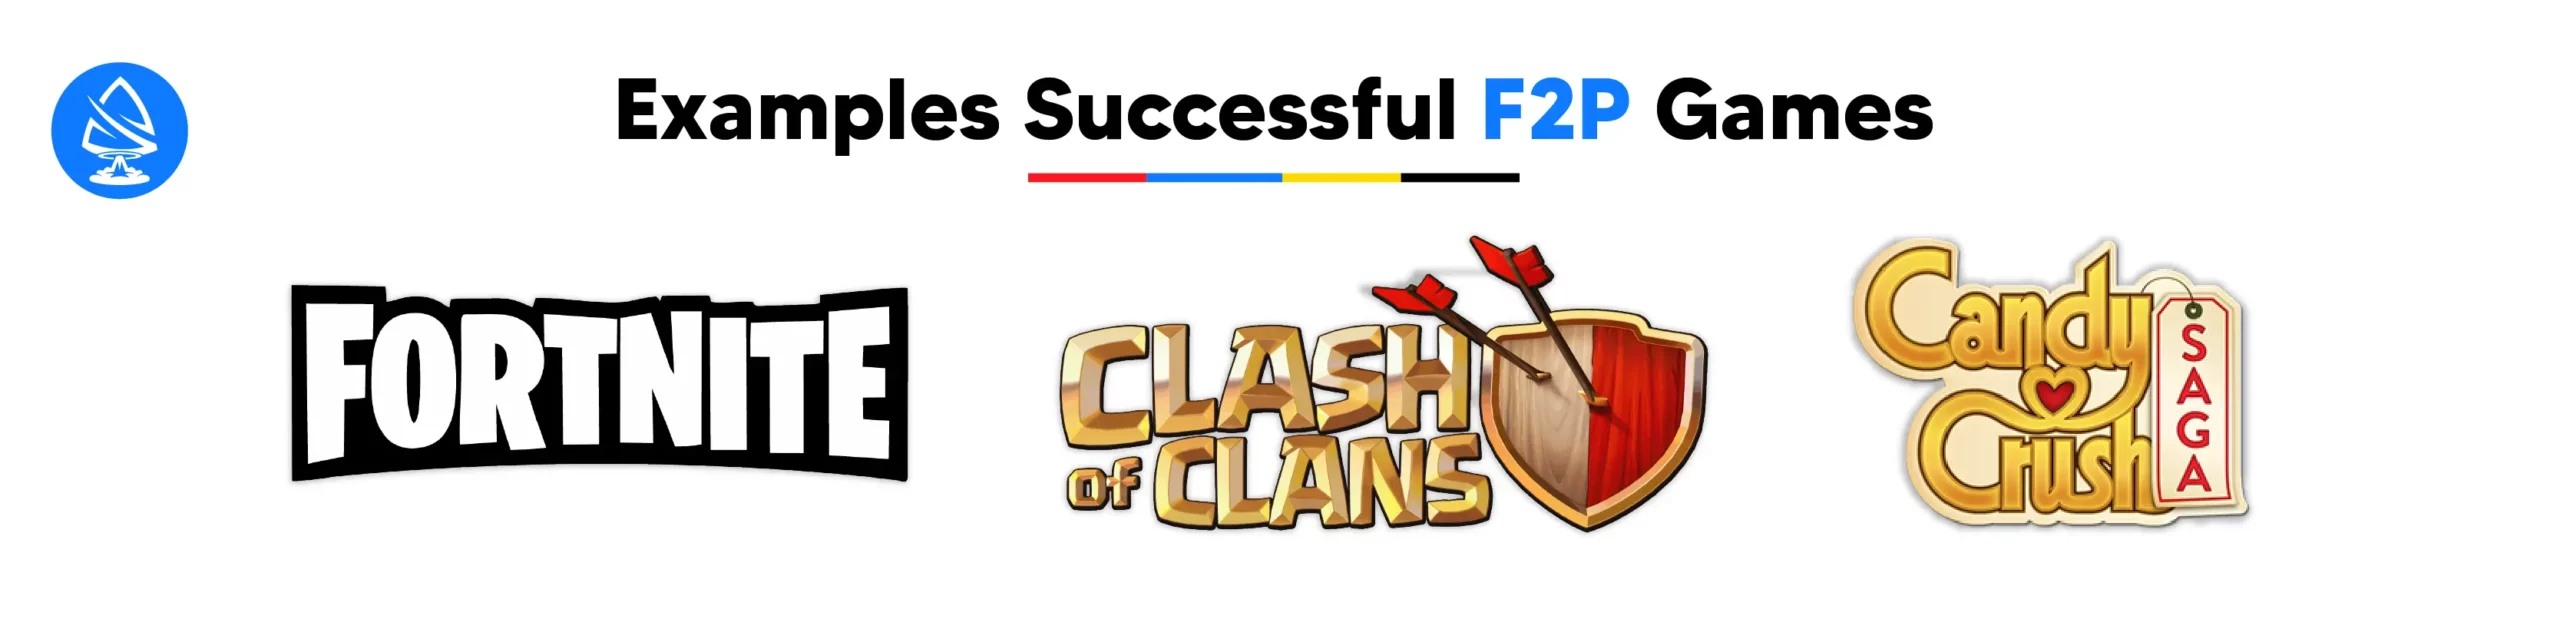 Examples Successful F2P Games